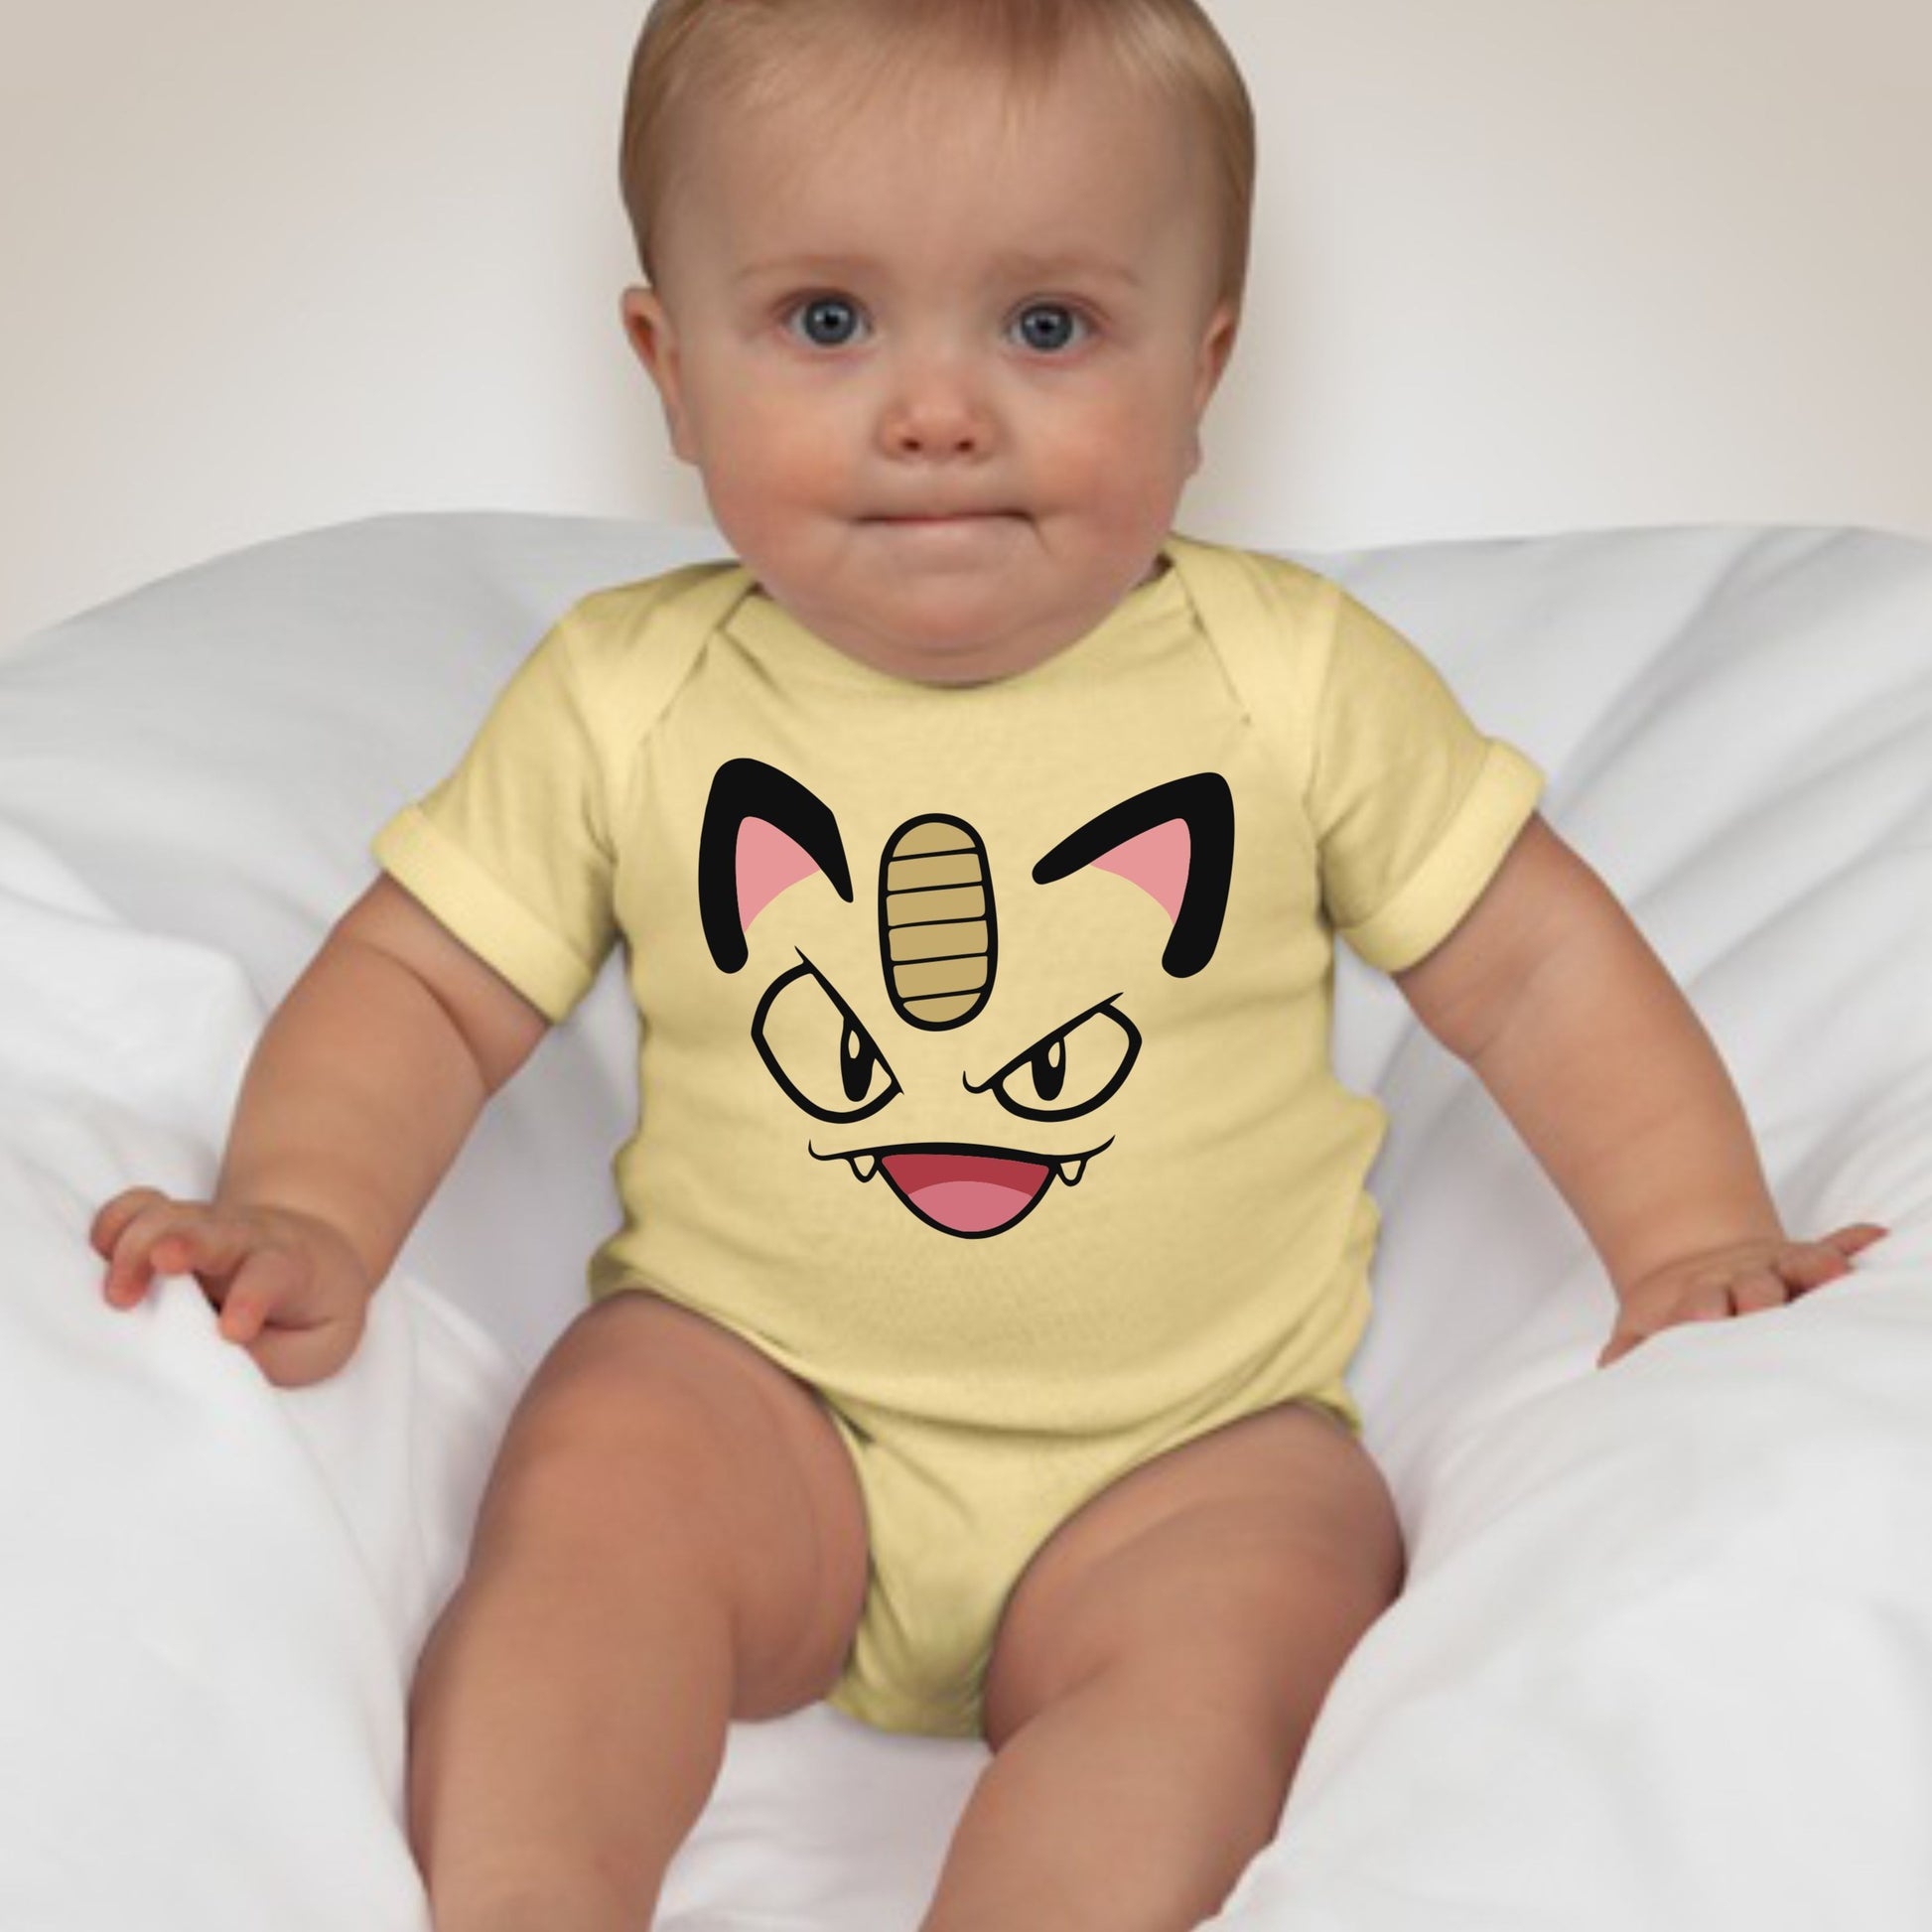 Baby Character Onesies with FREE Name Back Print - Pokemon-Meowt - MYSTYLEMYCLOTHING